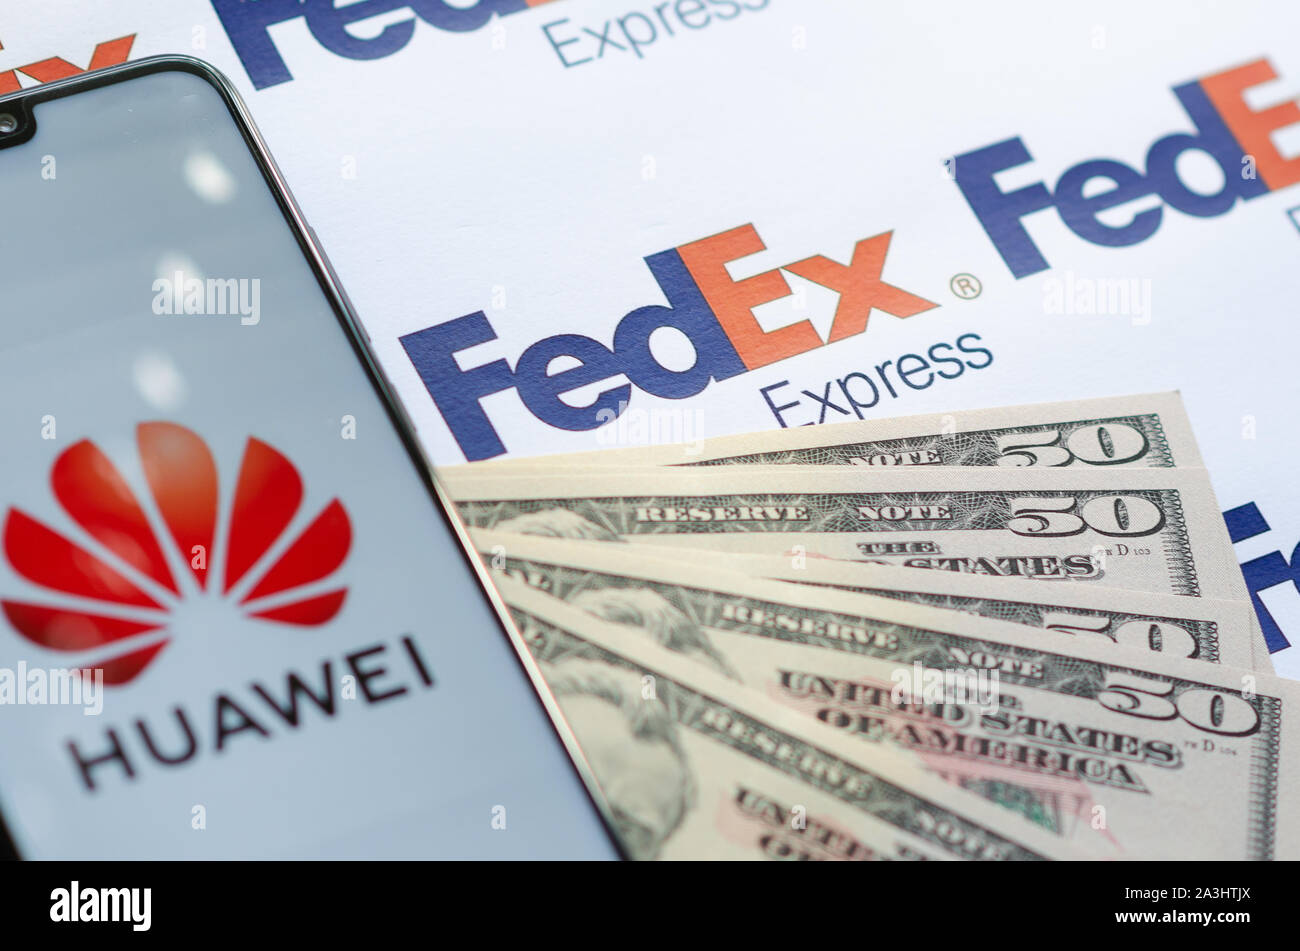 Huawei smartphone with logo on FedEX parcel logo with US dollars.This conceptual photo illustrates USA - China trade war and current investigations Stock Photo